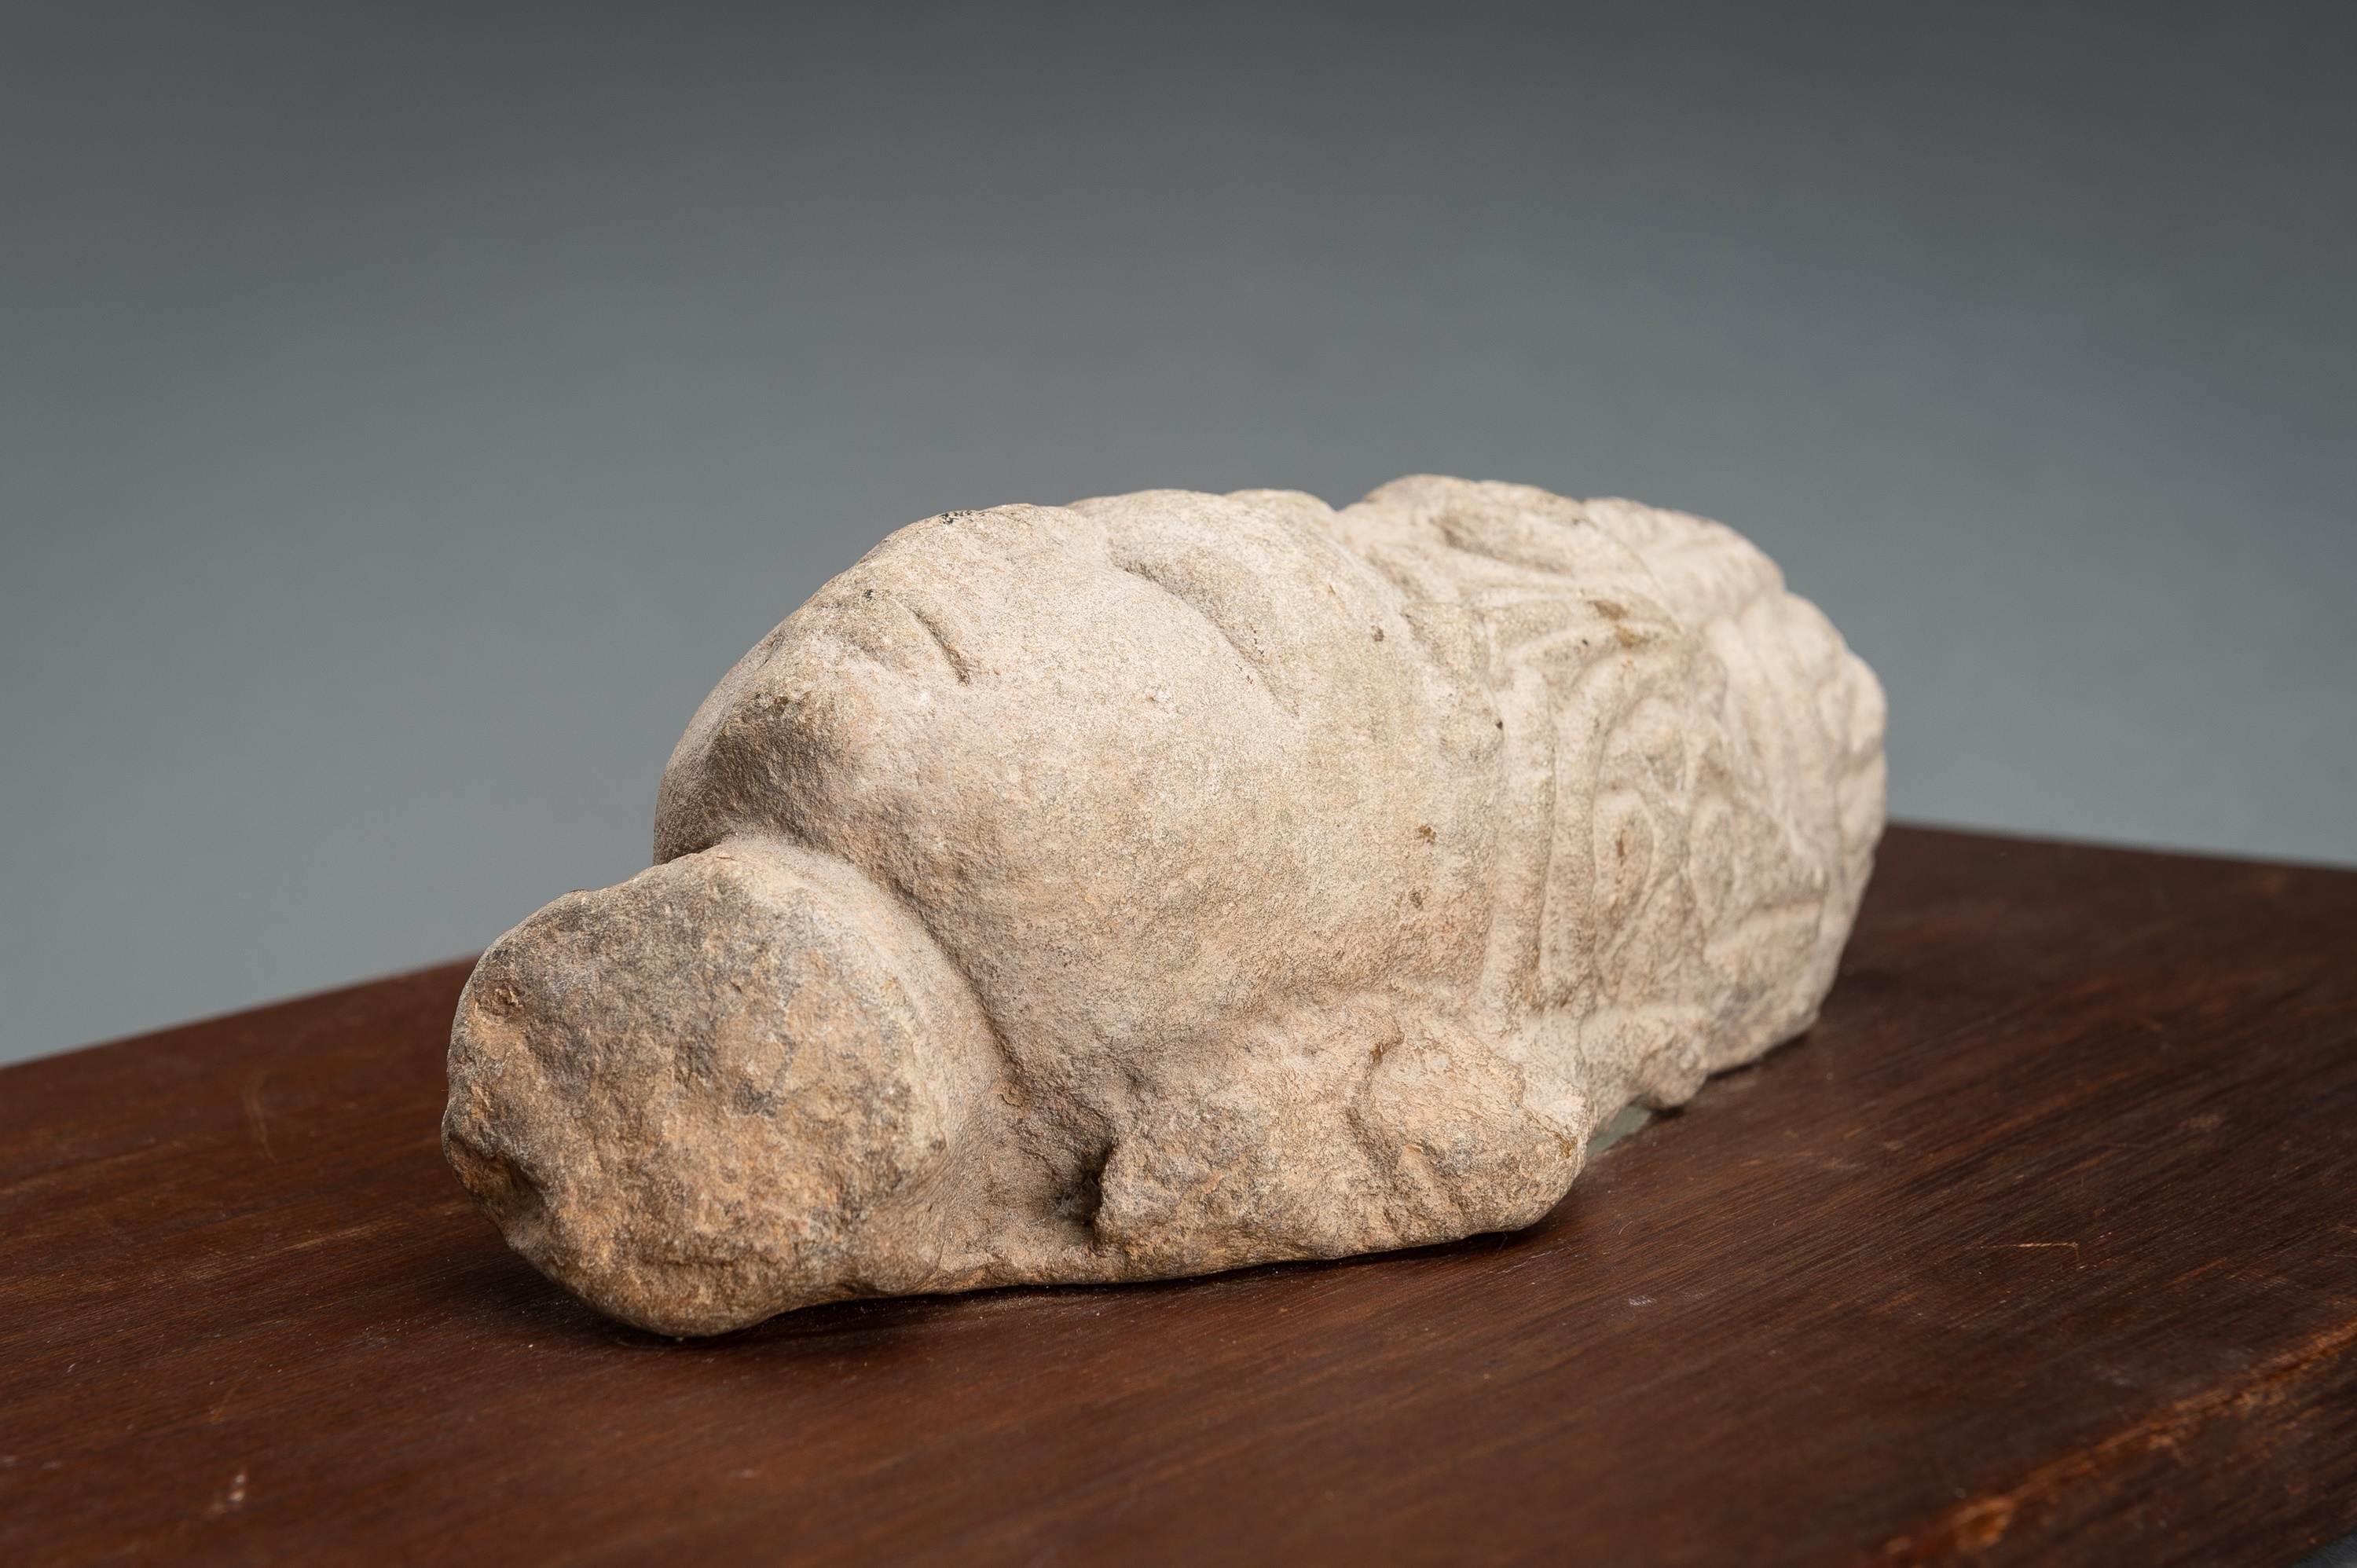 A SANDSTONE HEAD OF VISHNU WITH A MITER CROWN - Image 10 of 14